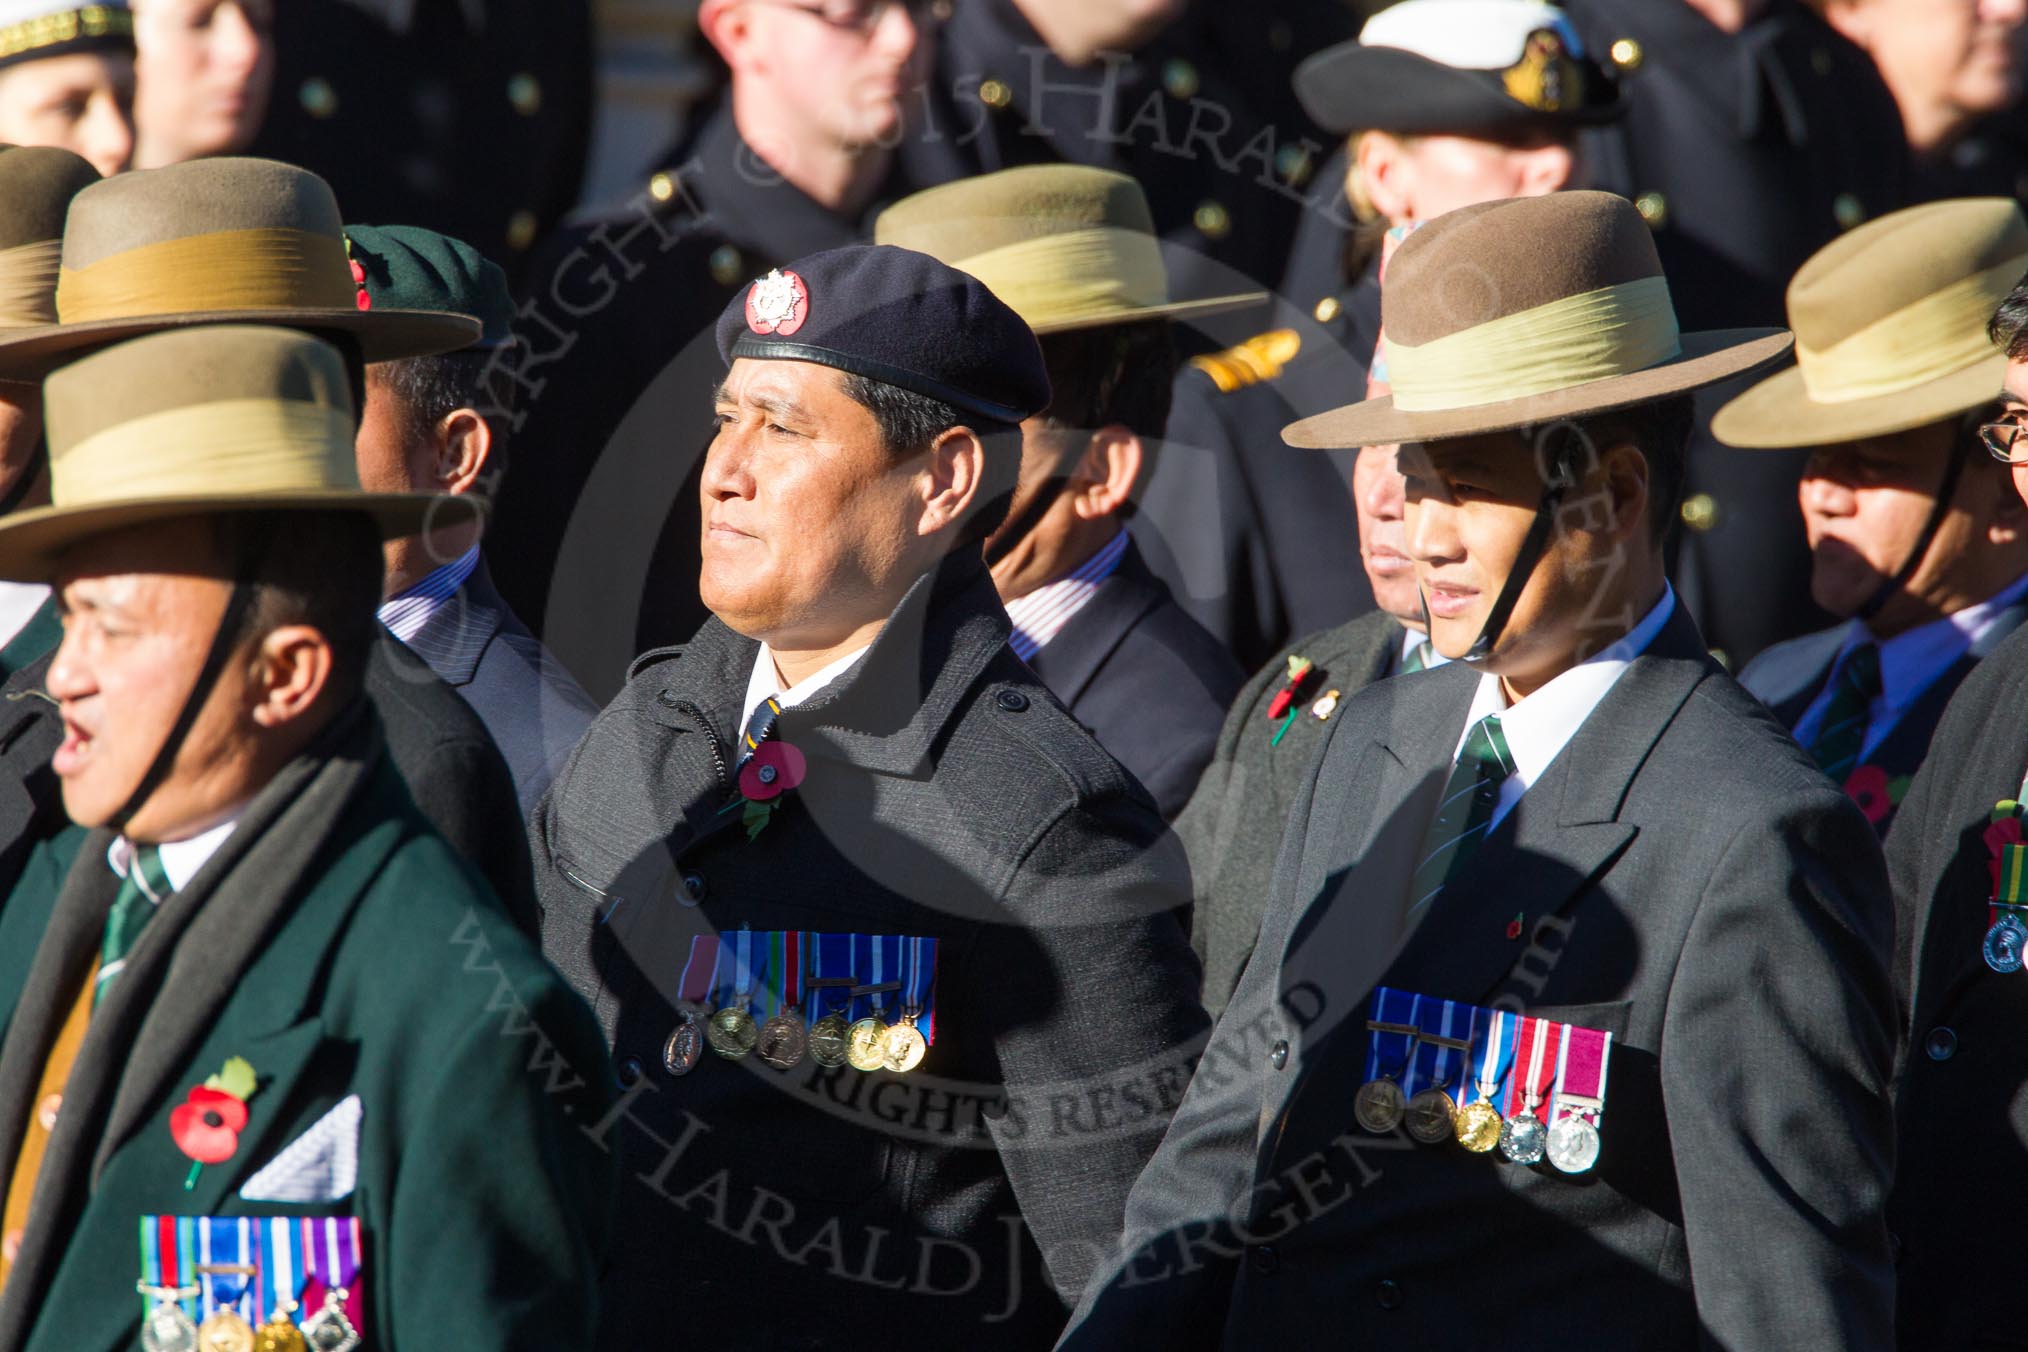 Remembrance Sunday Cenotaph March Past 2013: D2 - British Gurkha Welfare Association..
Press stand opposite the Foreign Office building, Whitehall, London SW1,
London,
Greater London,
United Kingdom,
on 10 November 2013 at 11:38, image #38